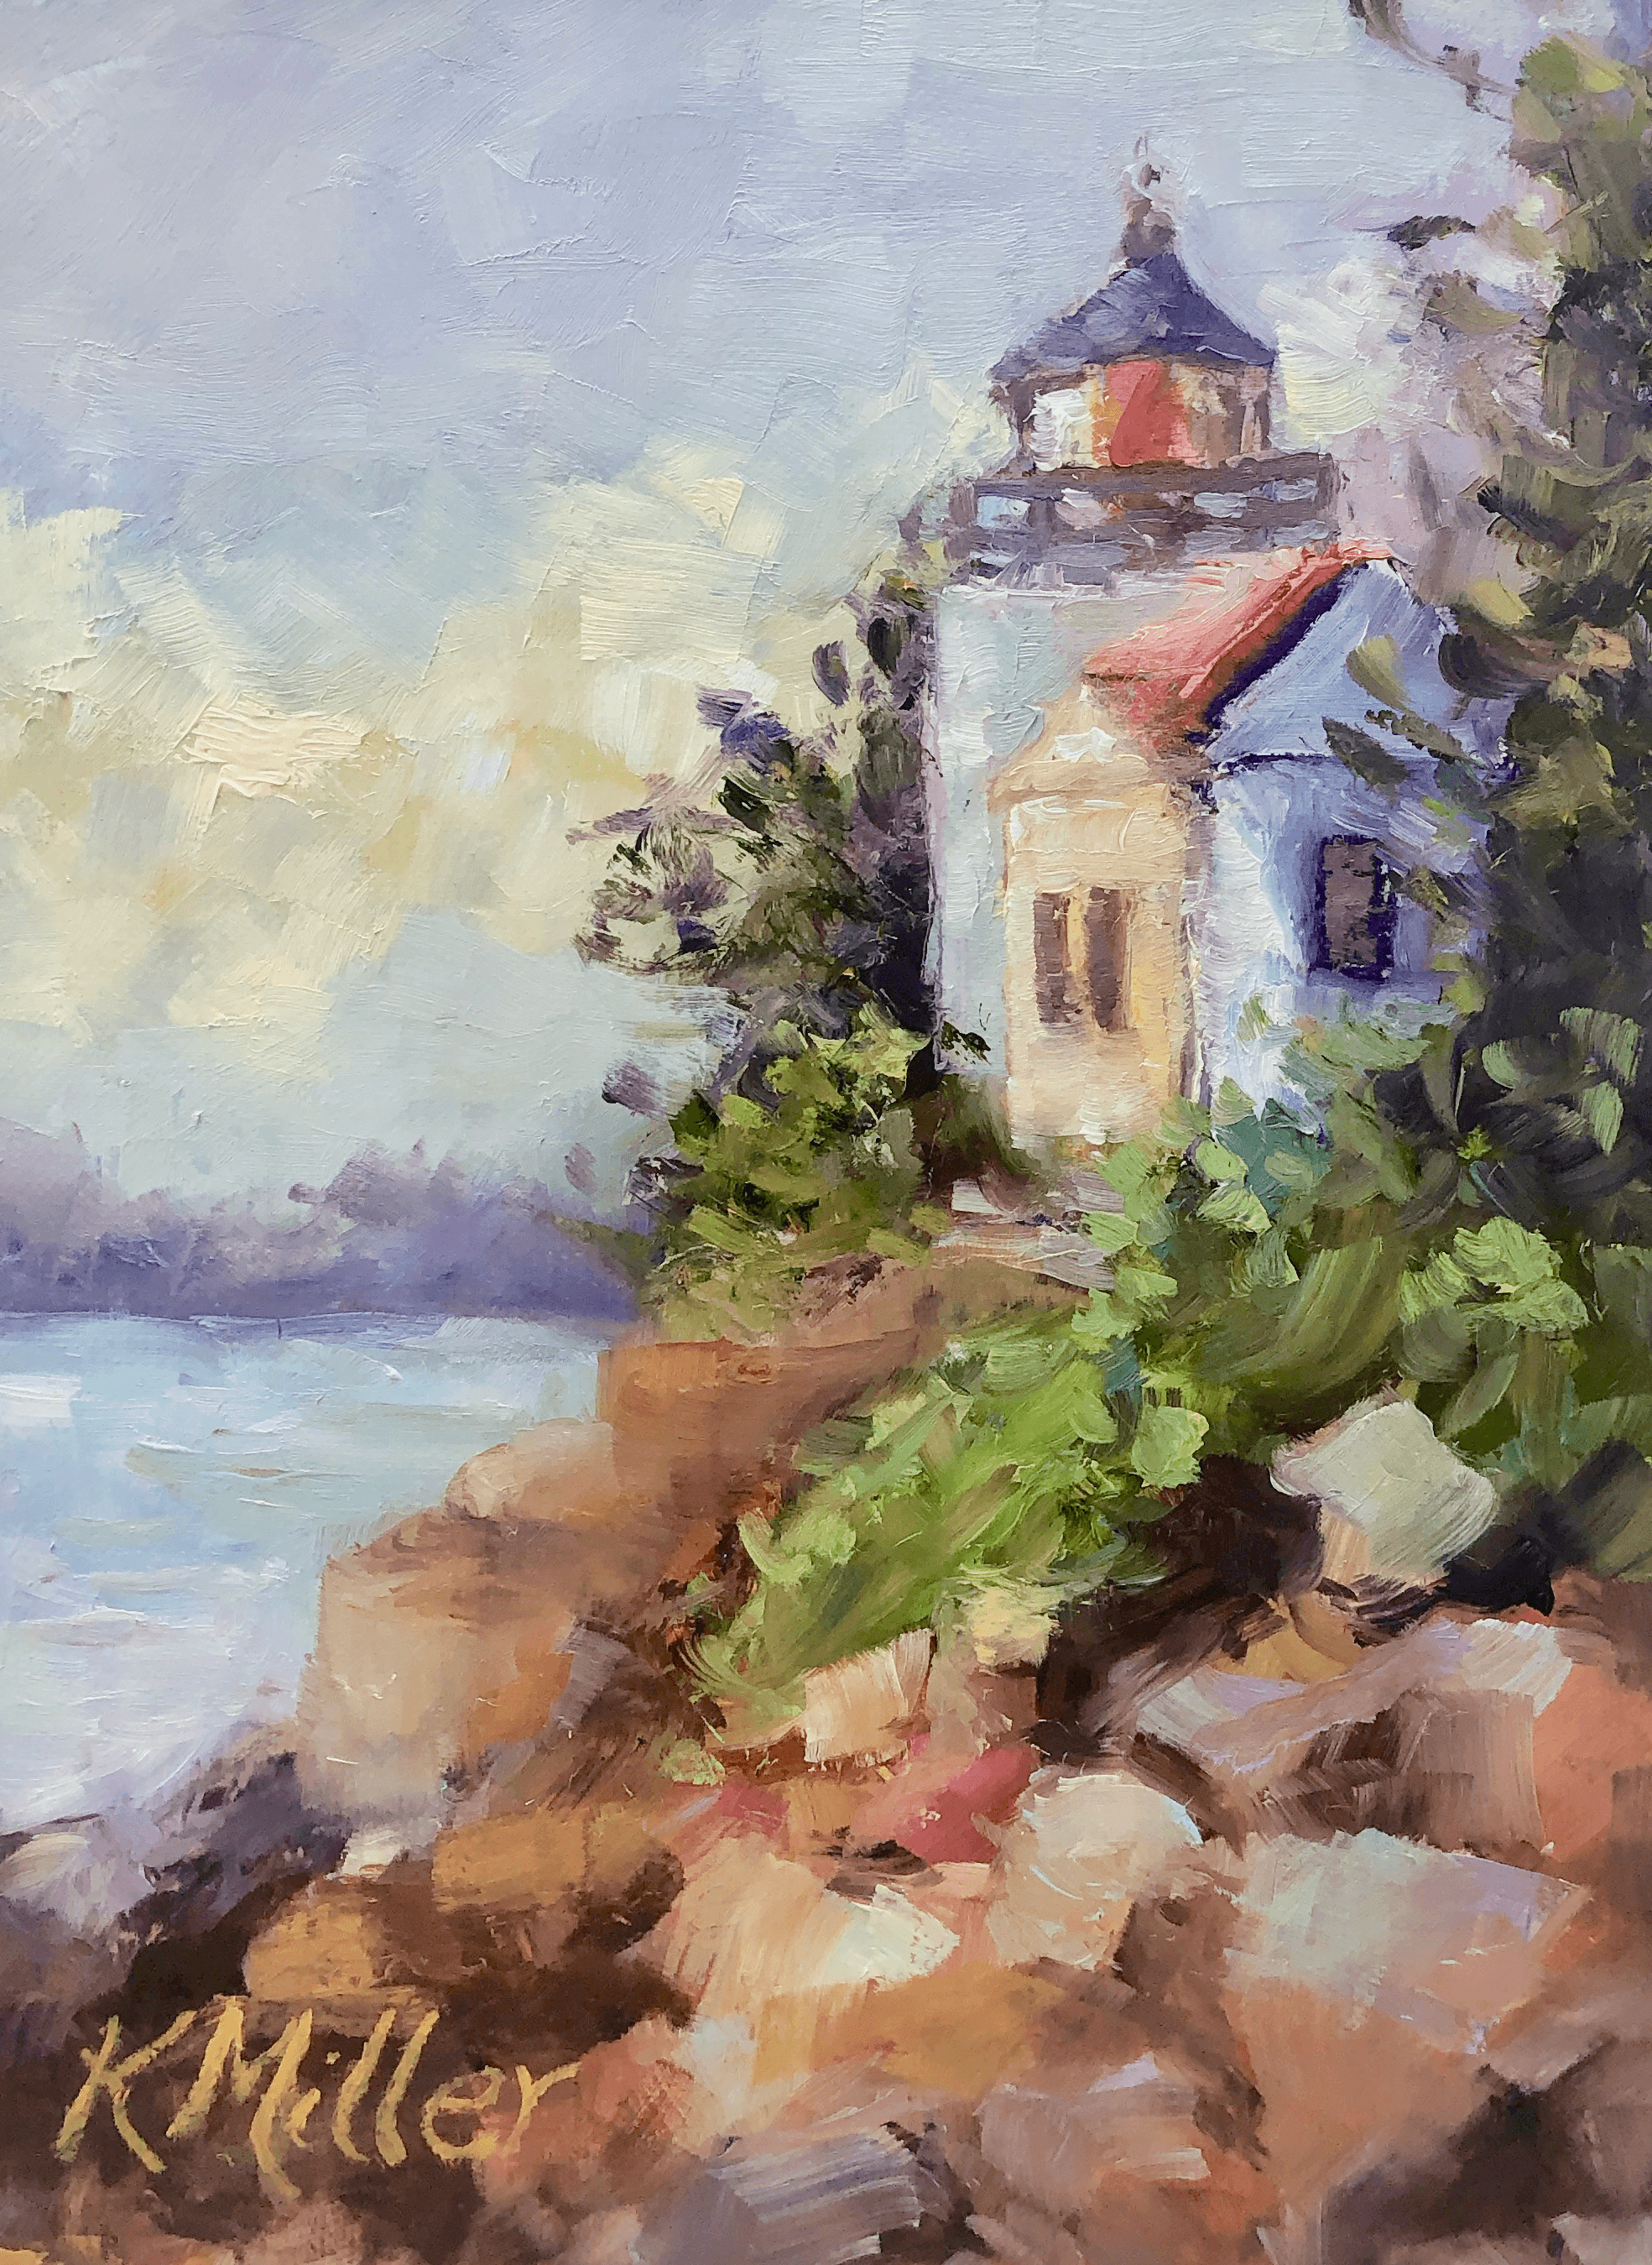 Bass Harbor Head Light Station painting by Kathy Miller